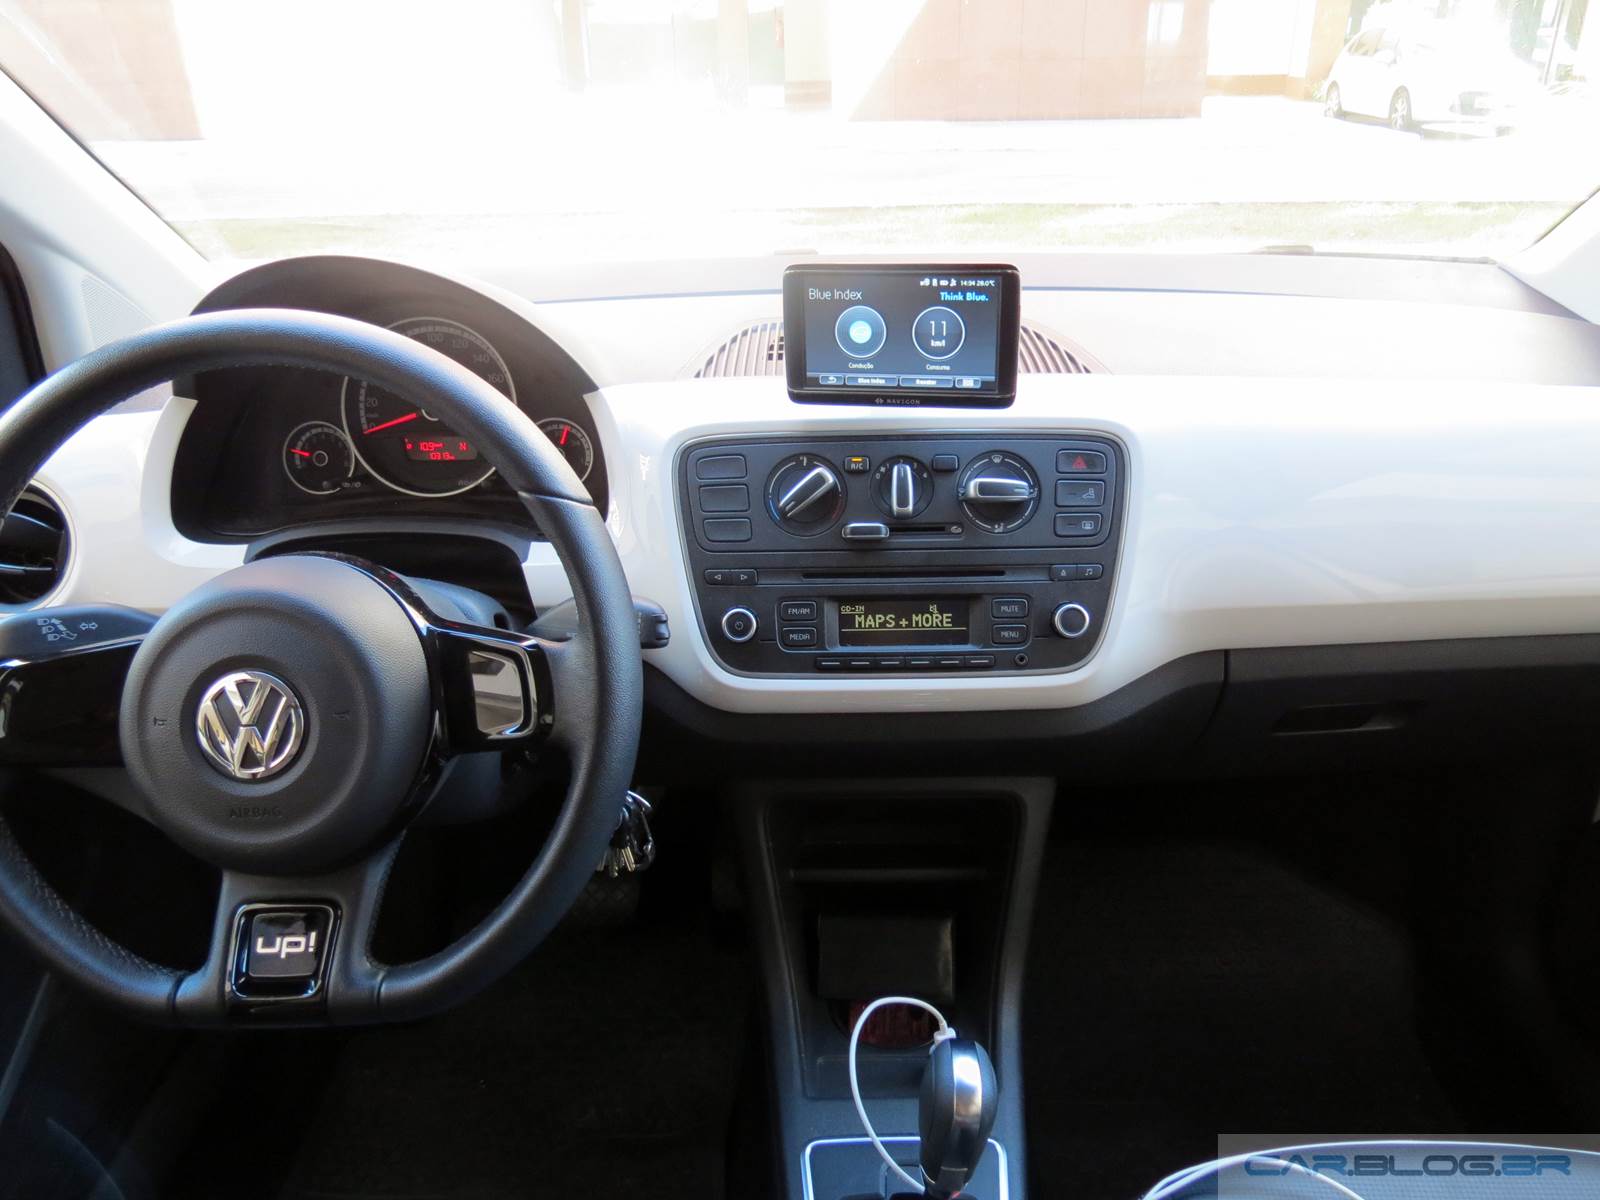 Volkswagen-Up-Maps-and-More%2B%25282%2529.JPG